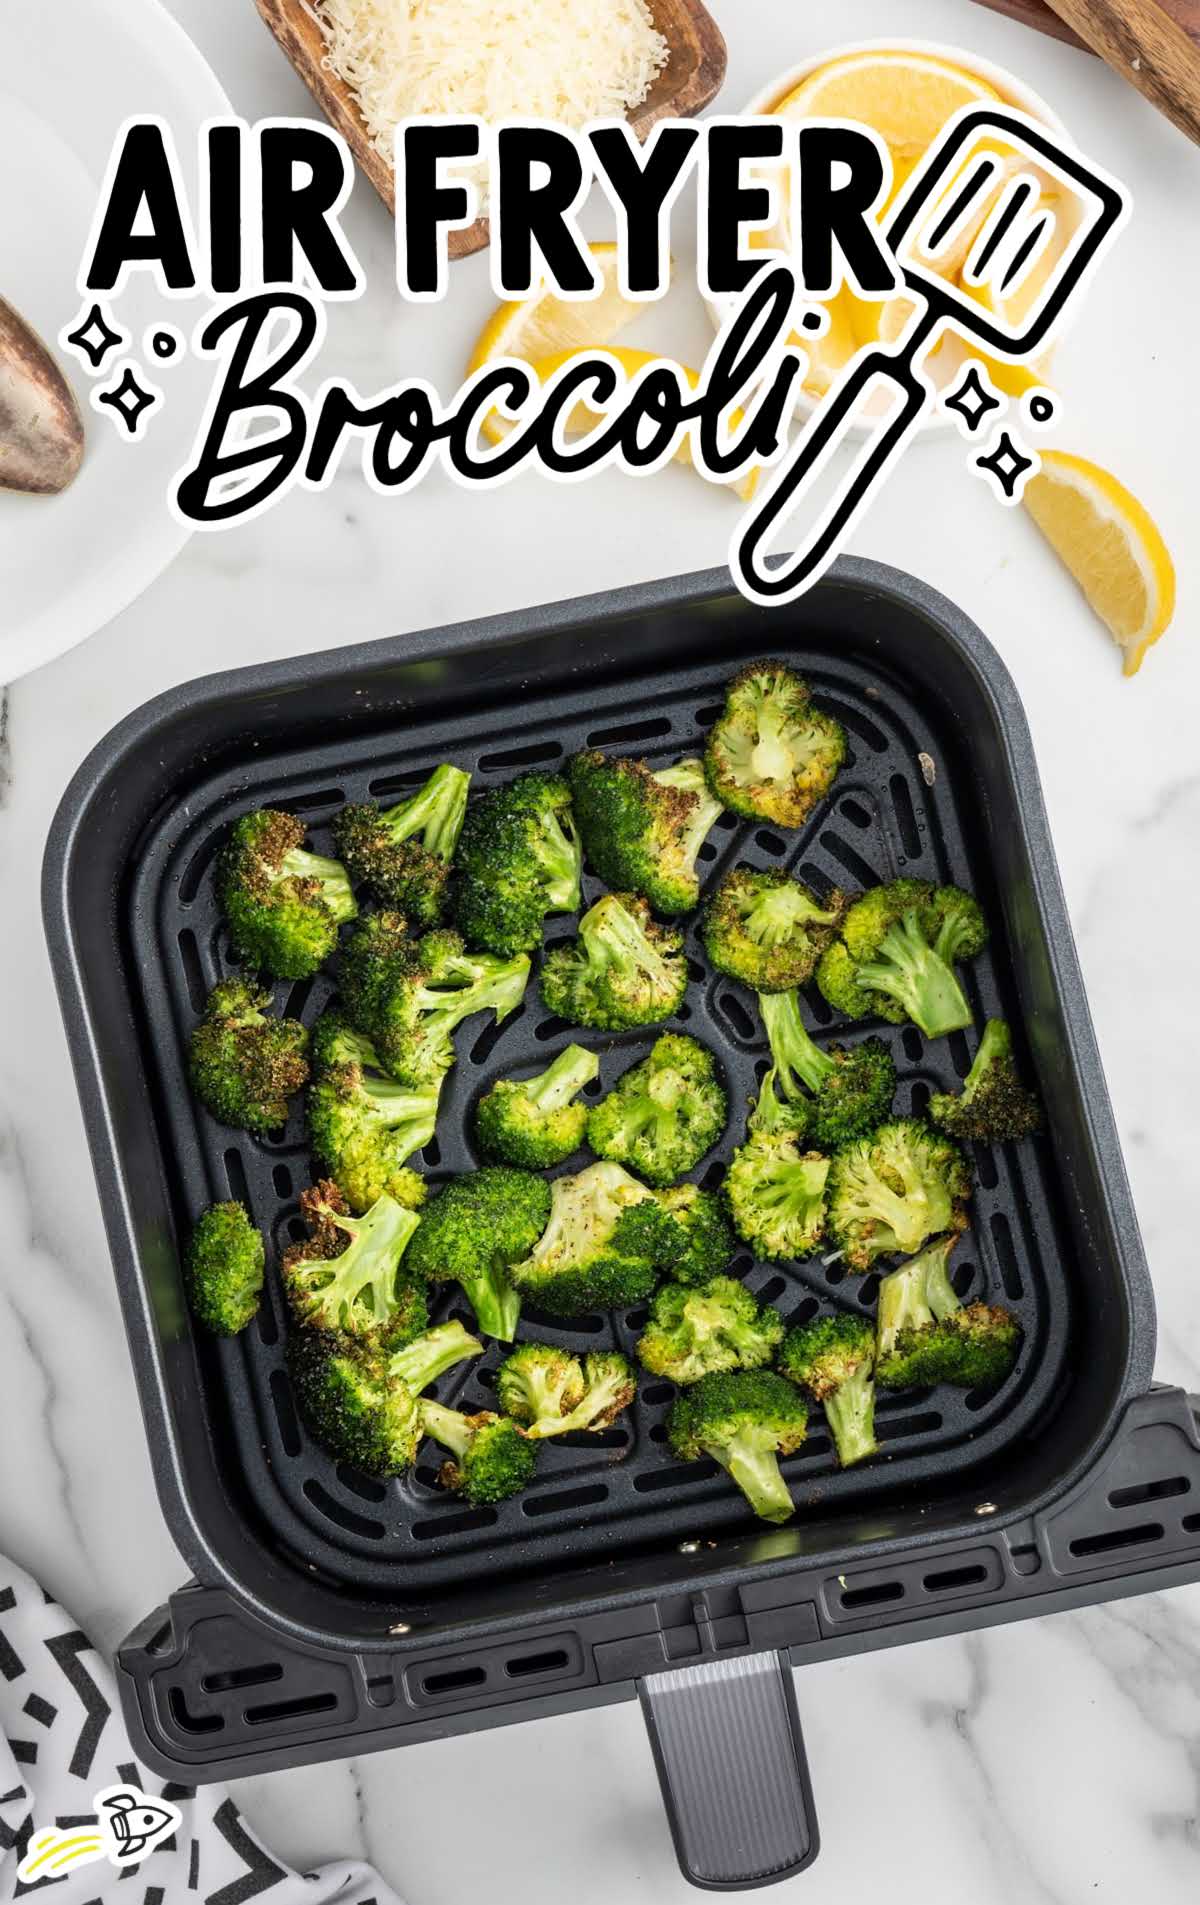 Overhead shot of pieces of broccolis in a air fryer